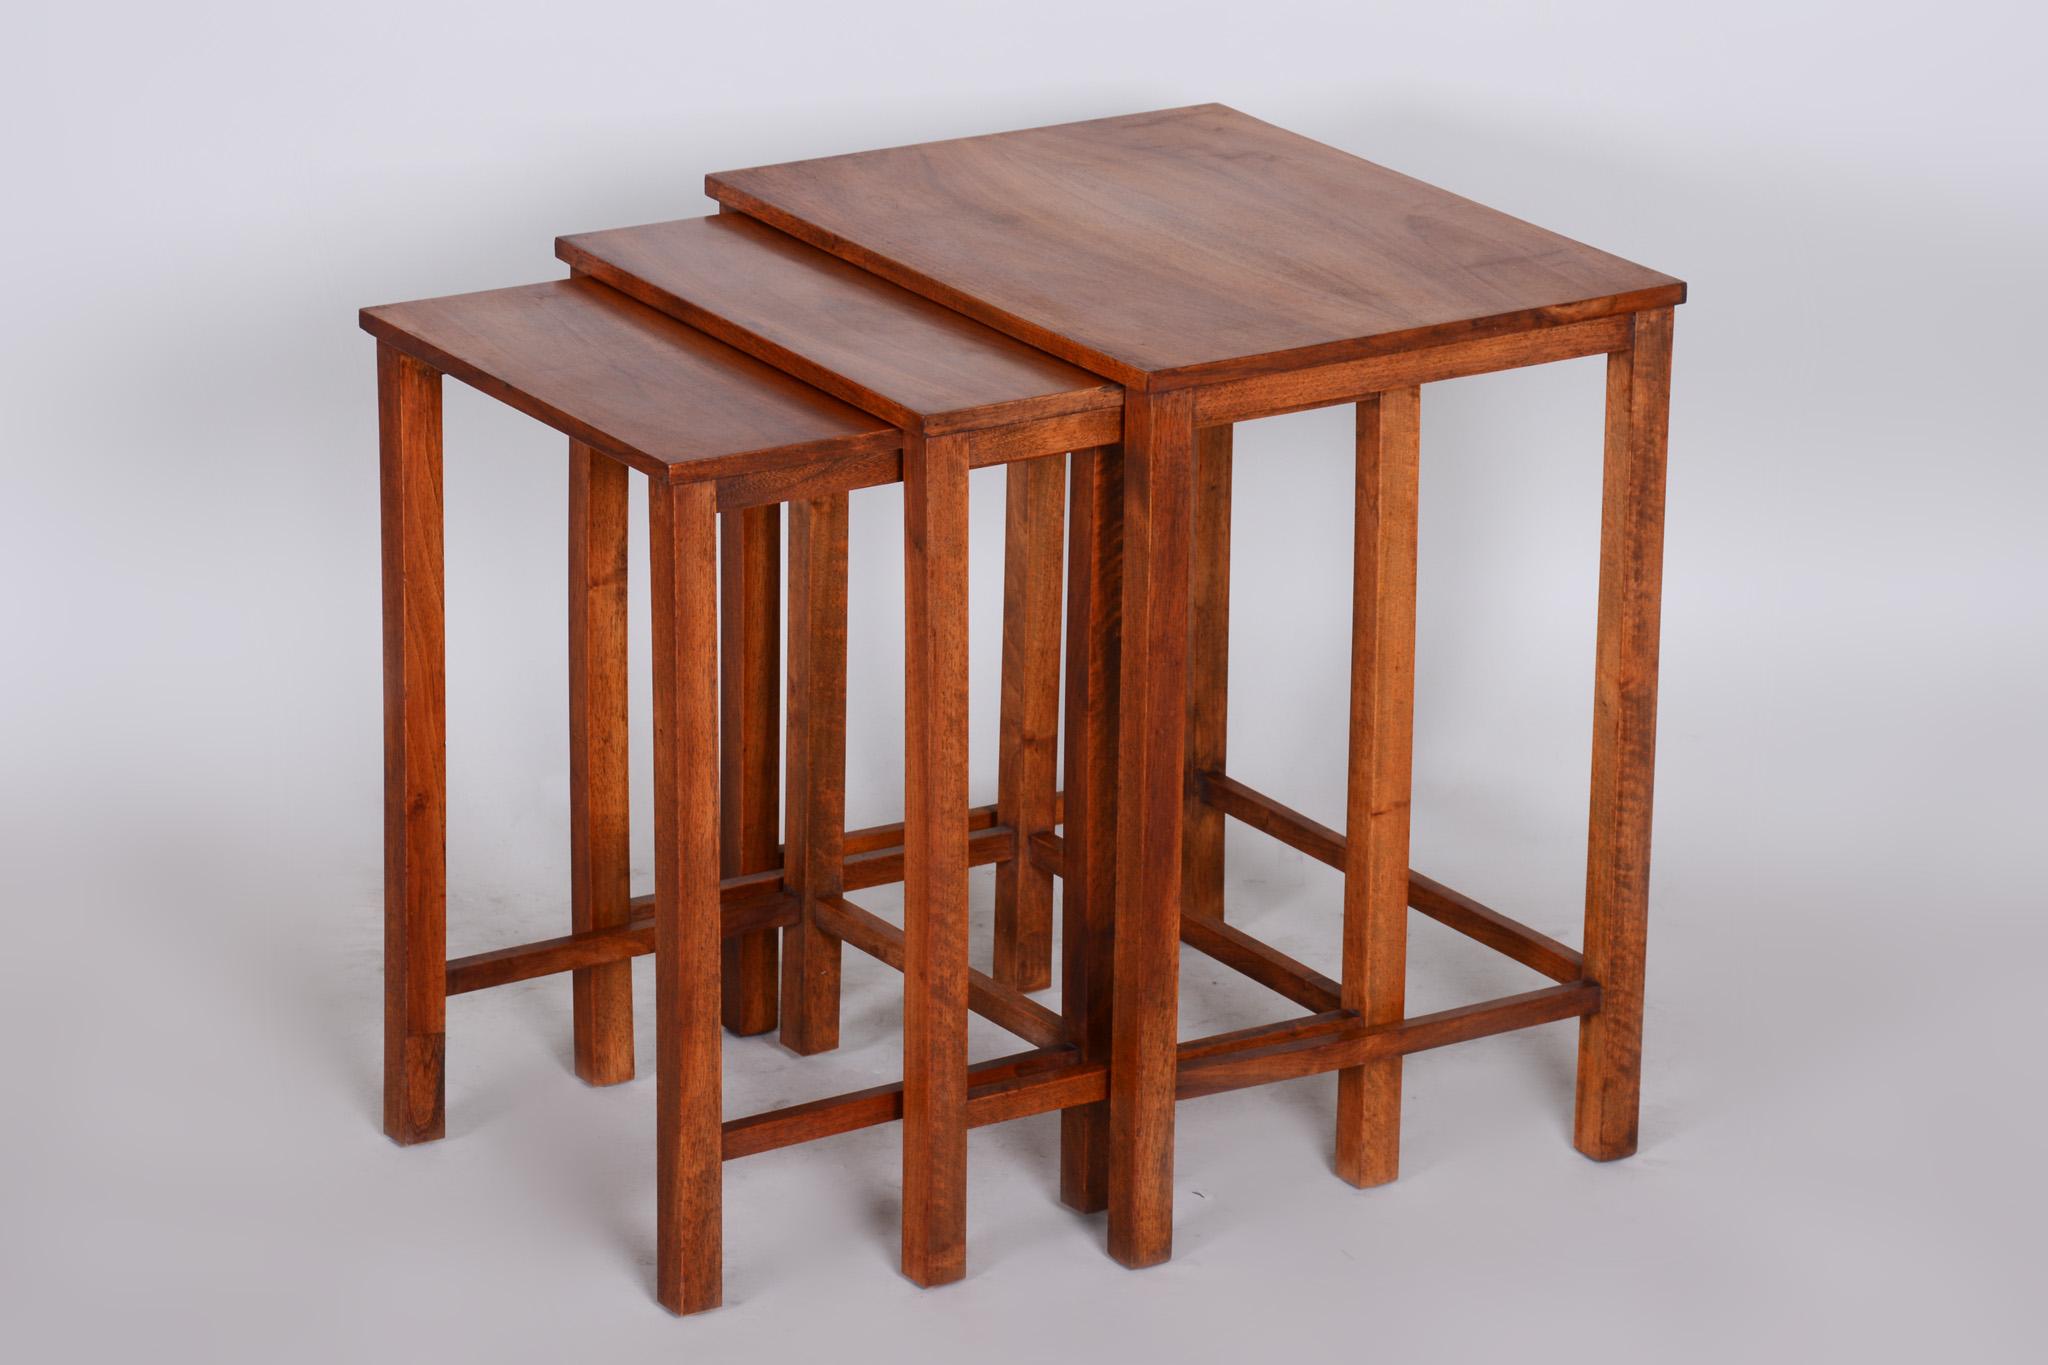 Original Condition Brown Nest Tables Made in the 1930s, Czech For Sale 1